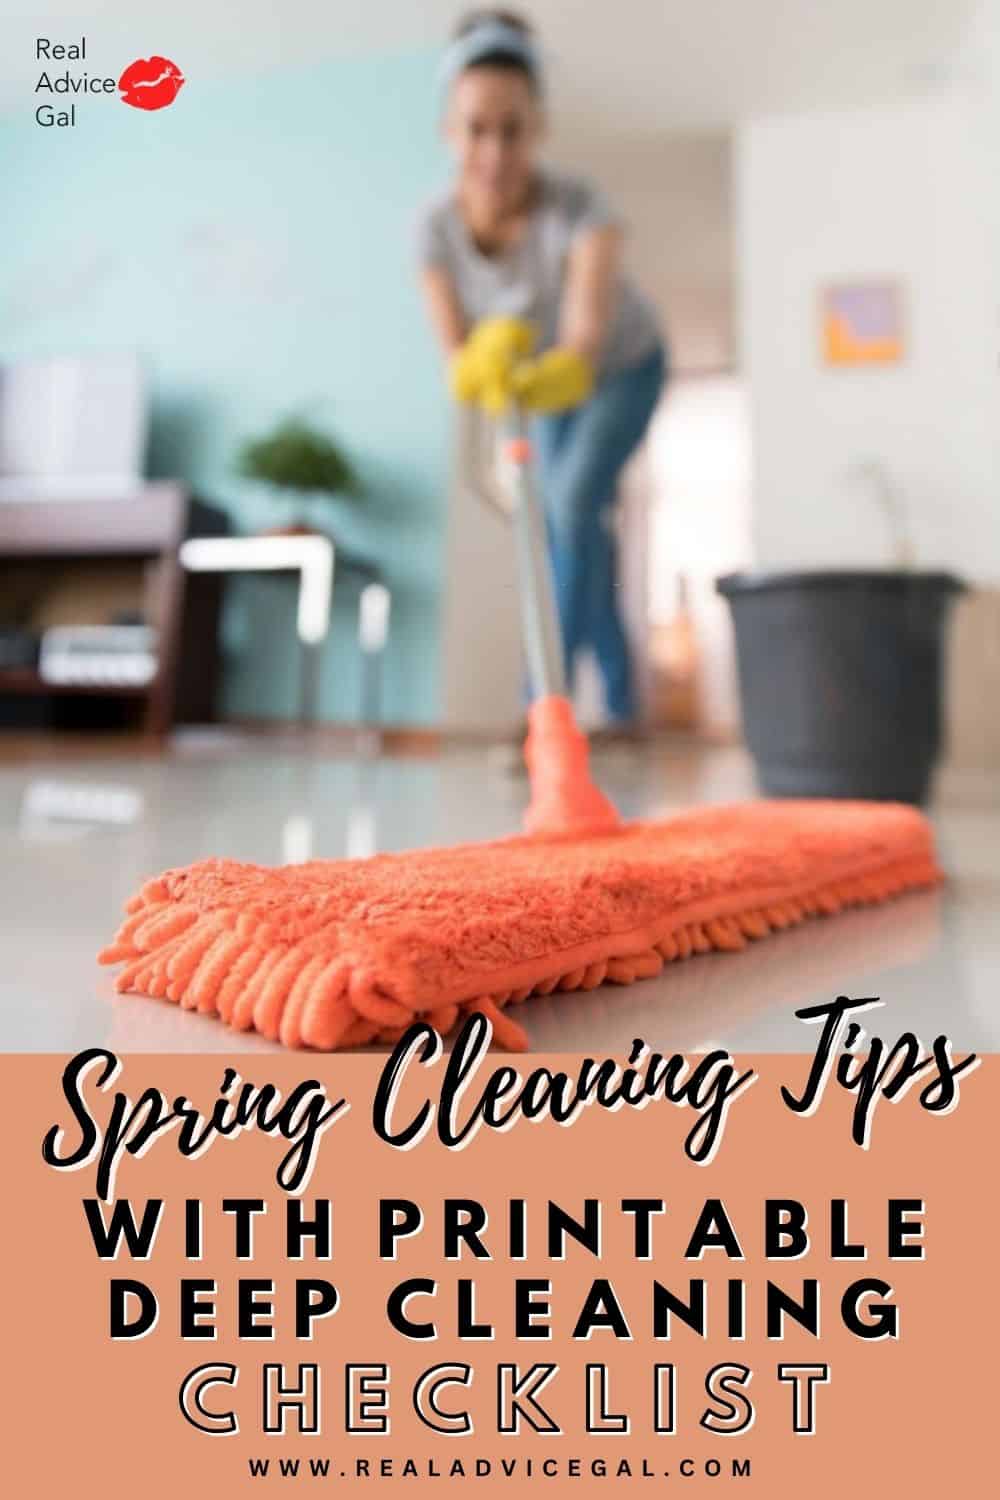 https://realadvicegal.com/wp-content/uploads/2022/03/Spring-cleaning-tips-1.jpg